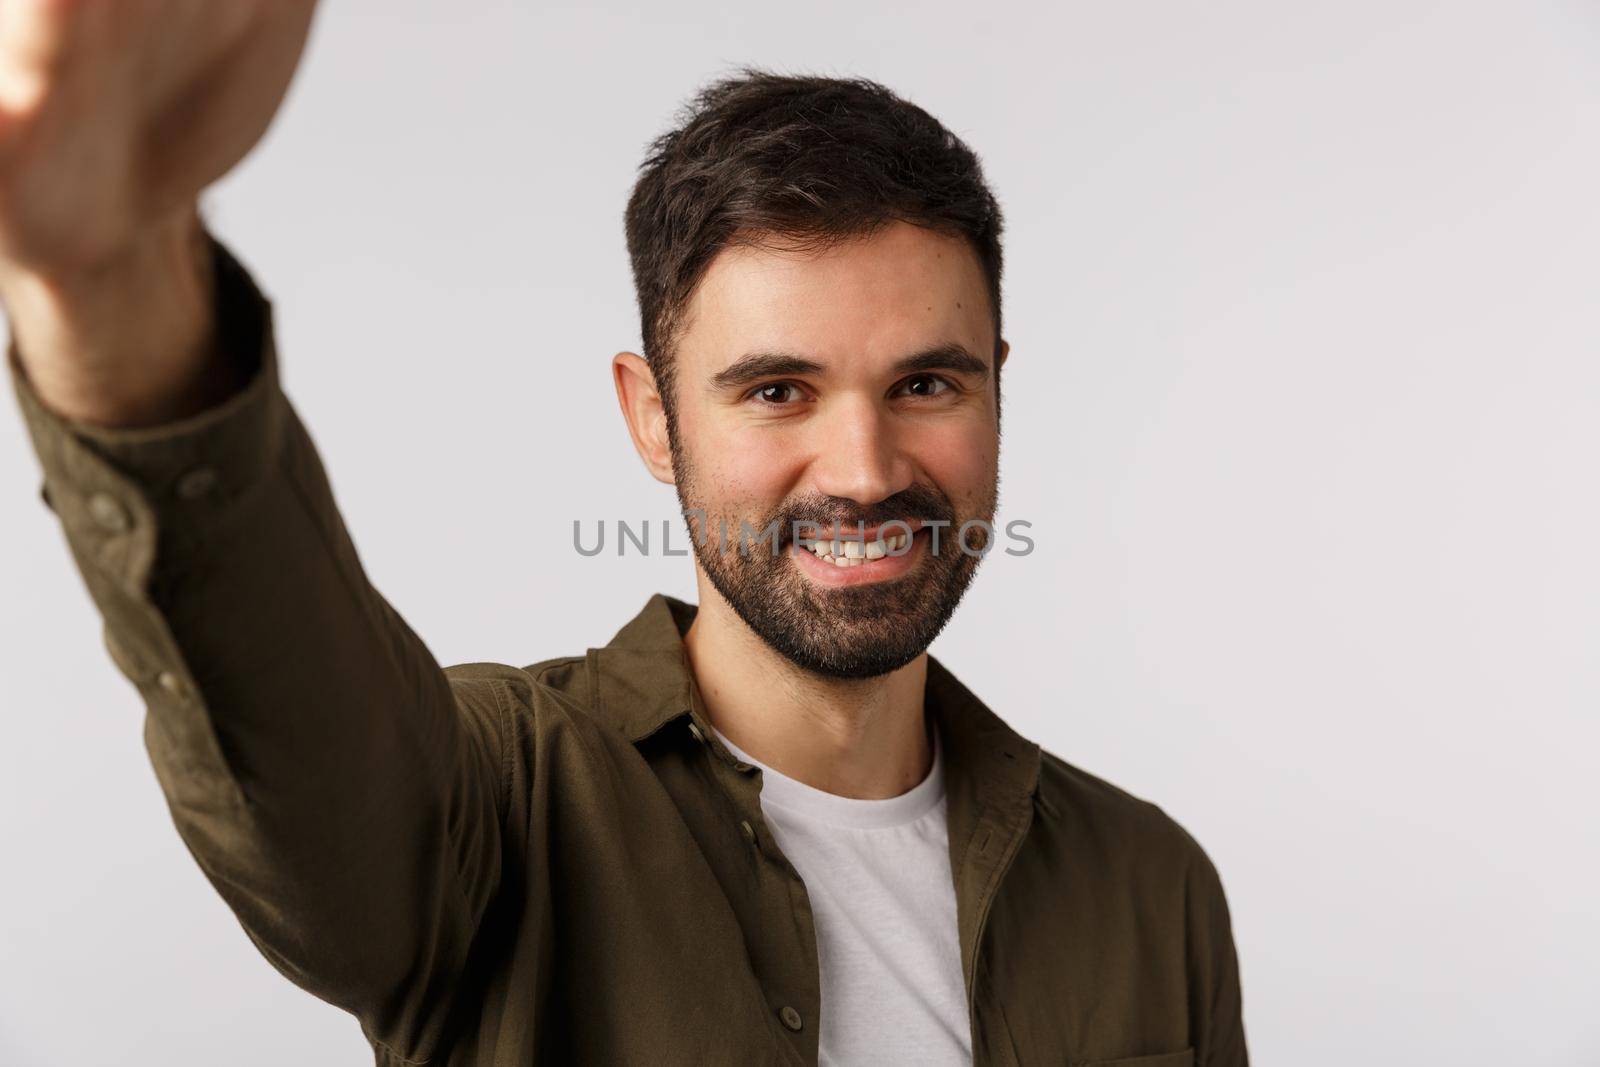 Handsome cheerful bearded man in coat want upload new photo gay dating application, hold smartphone with arm and smiling camera, taking selfie, standing white background joyful. Copy space